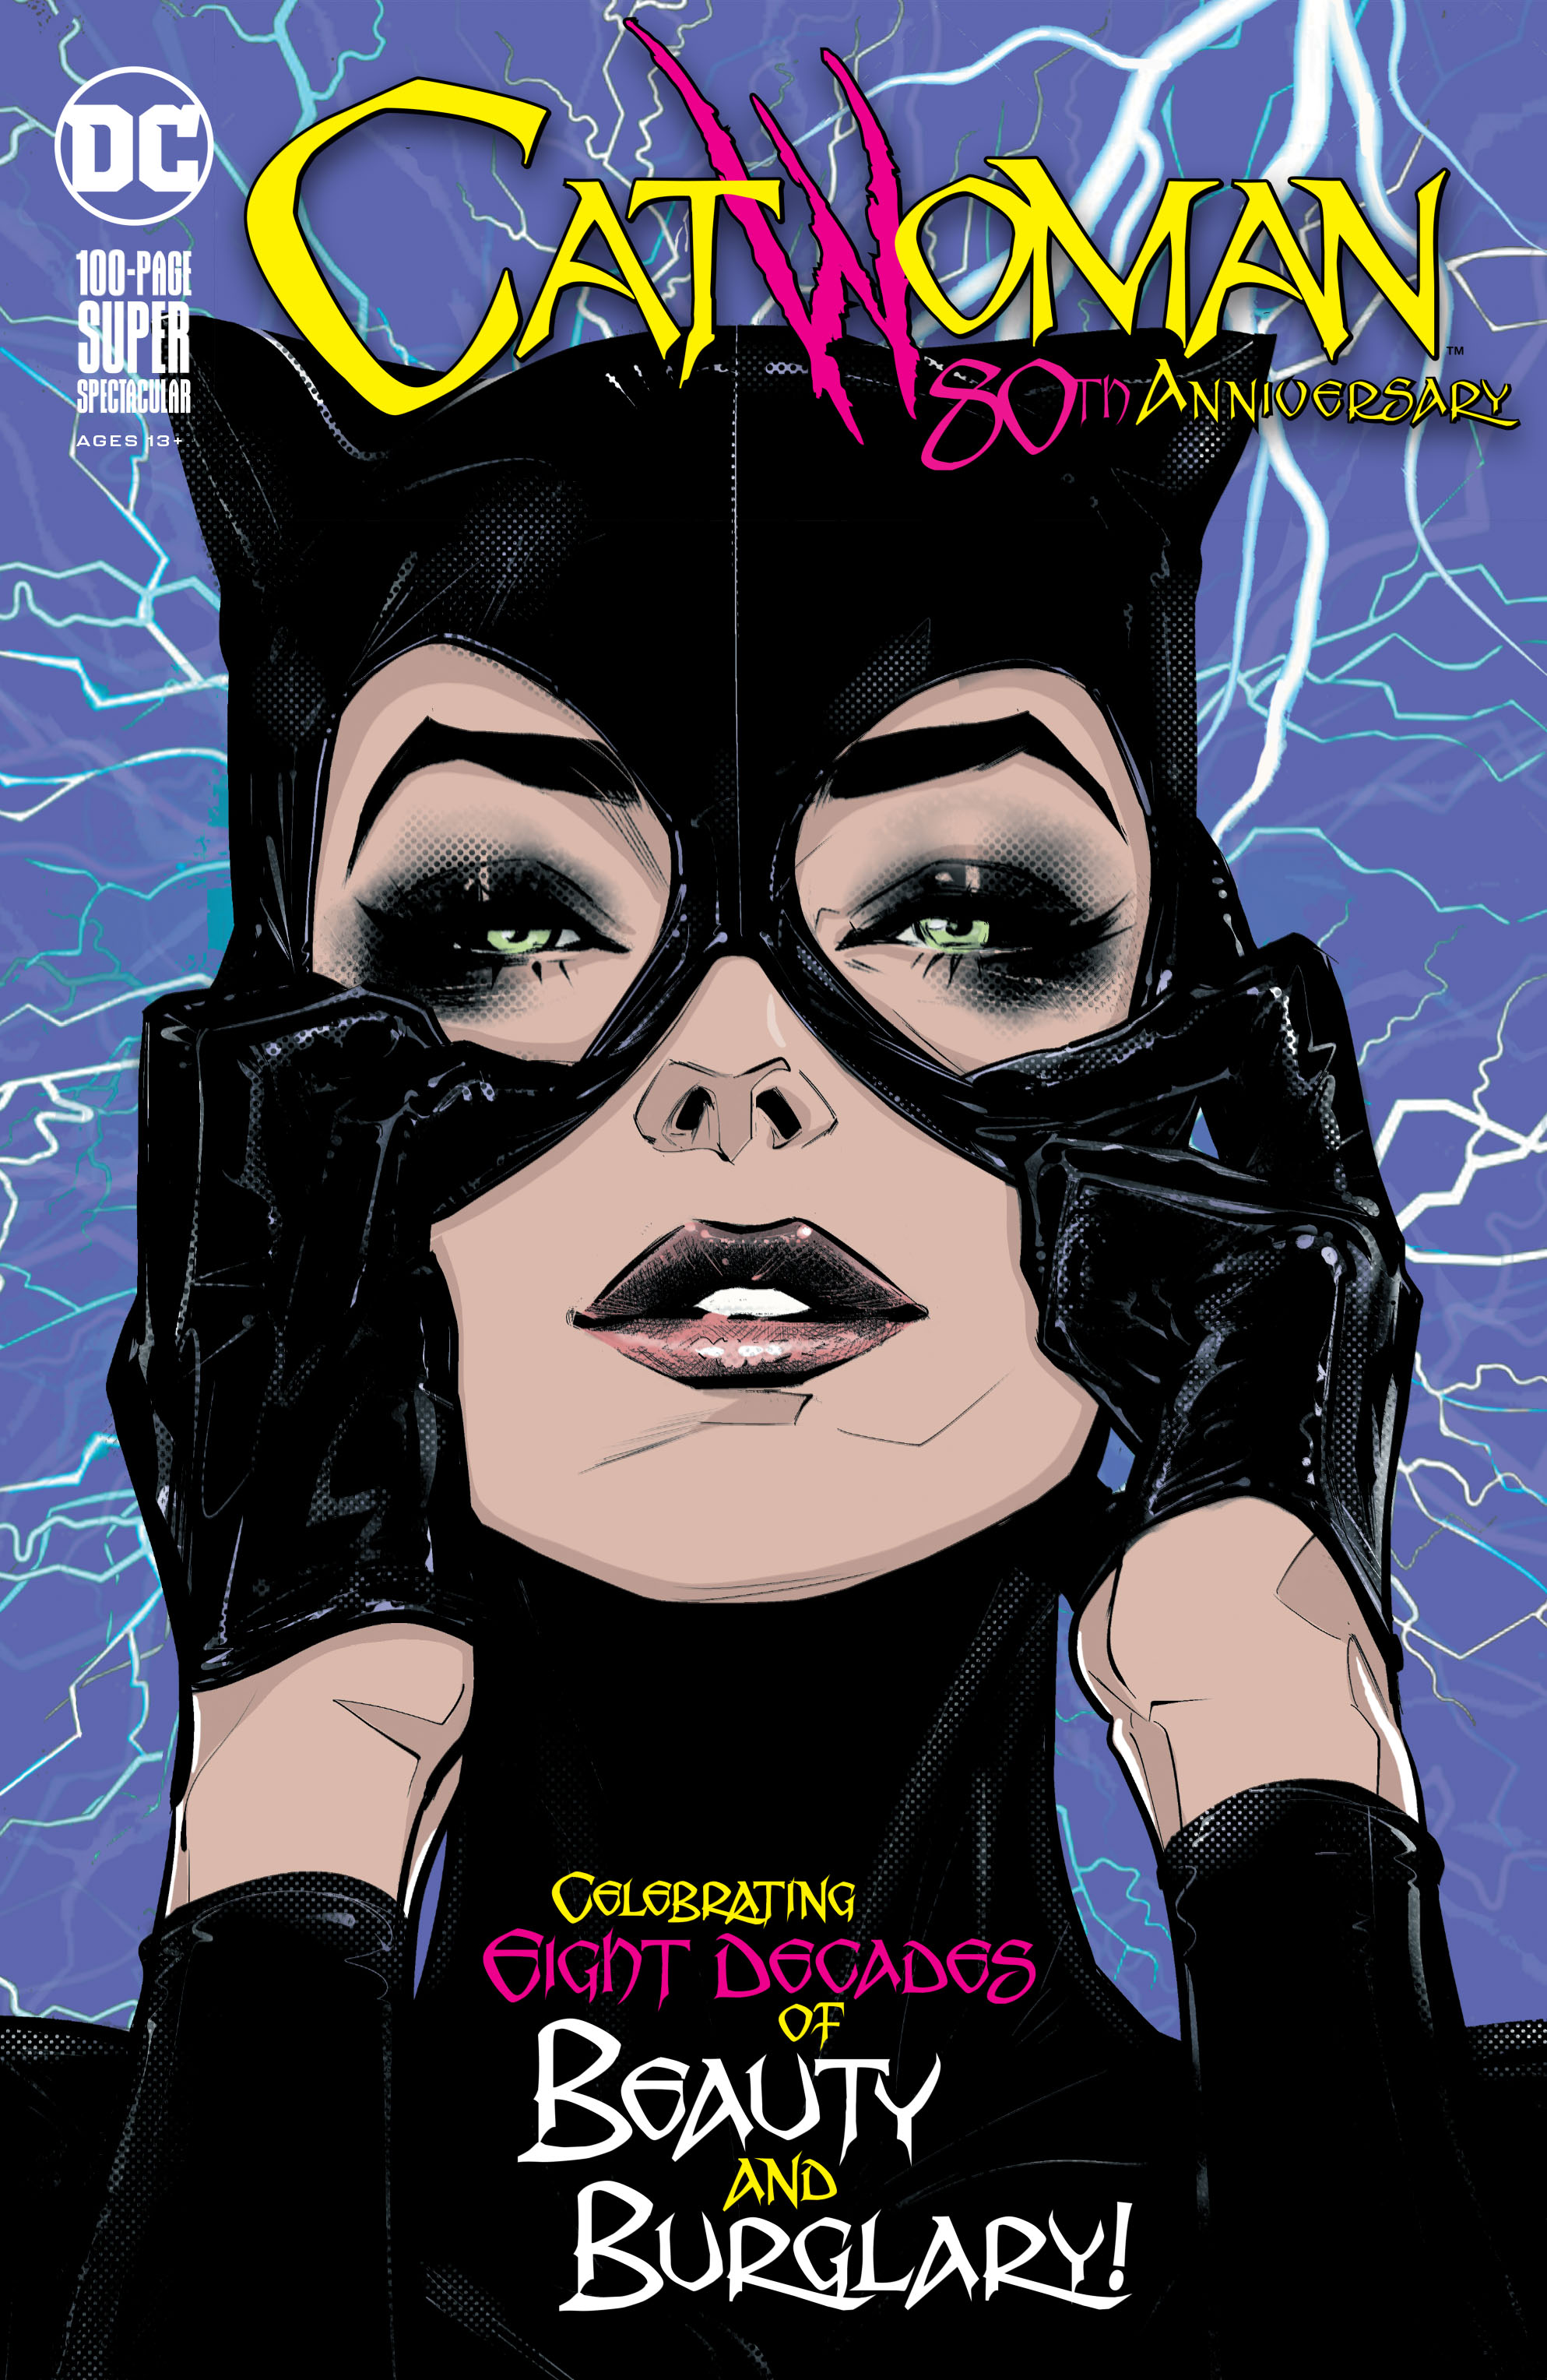 Read online Catwoman 80th Anniversary 100-Page Super Spectacular comic -  Issue # TPB - 1